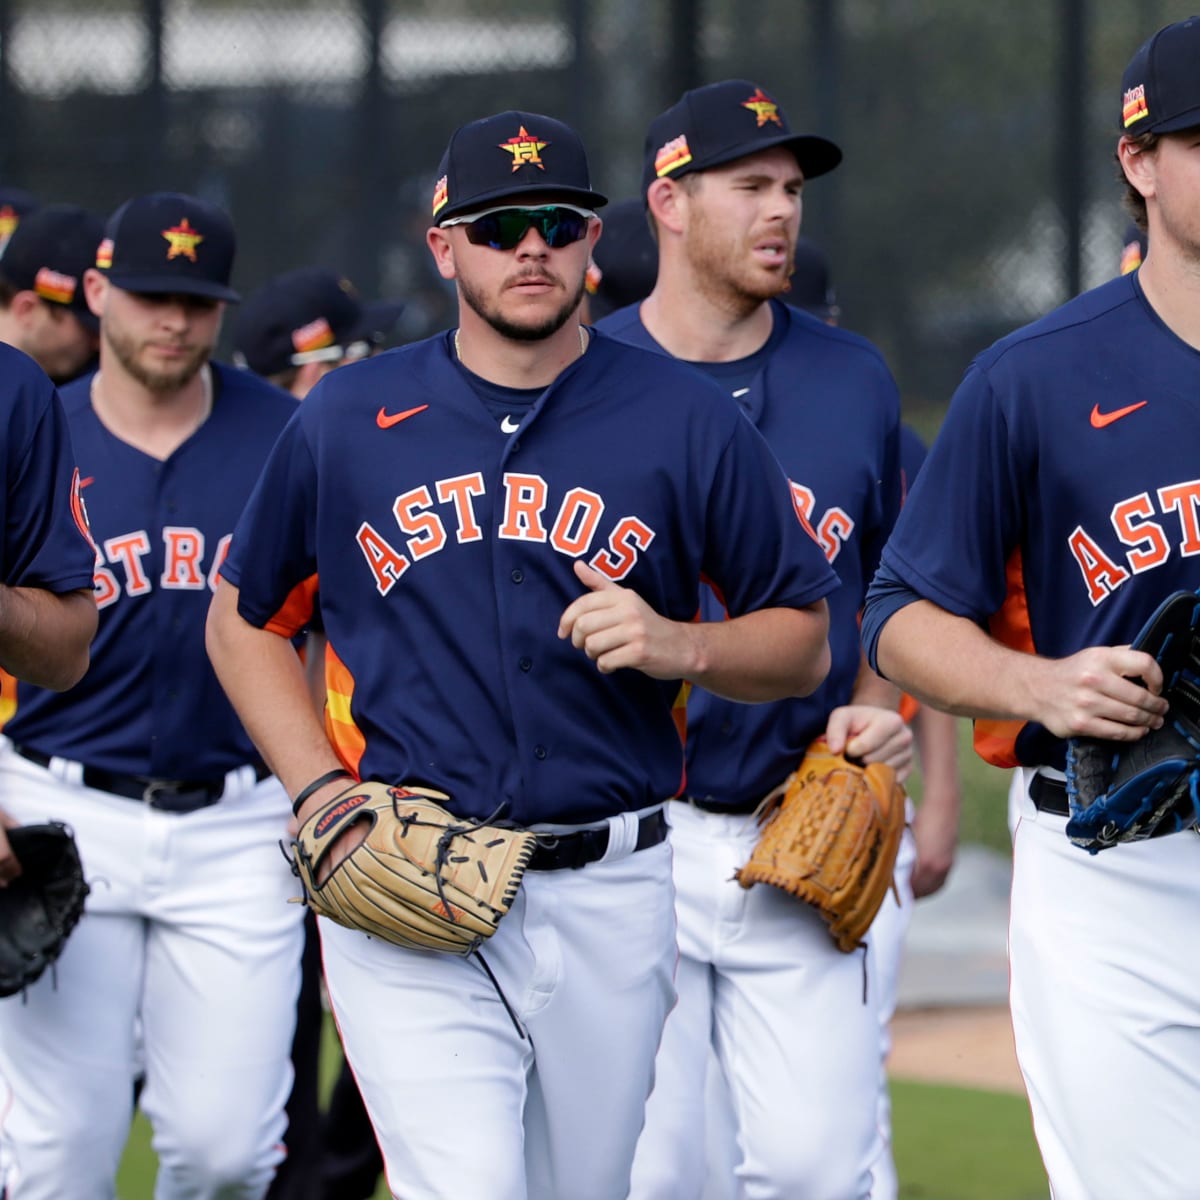 Astros cheating scandal puts MLBPA under fire - Sports Illustrated